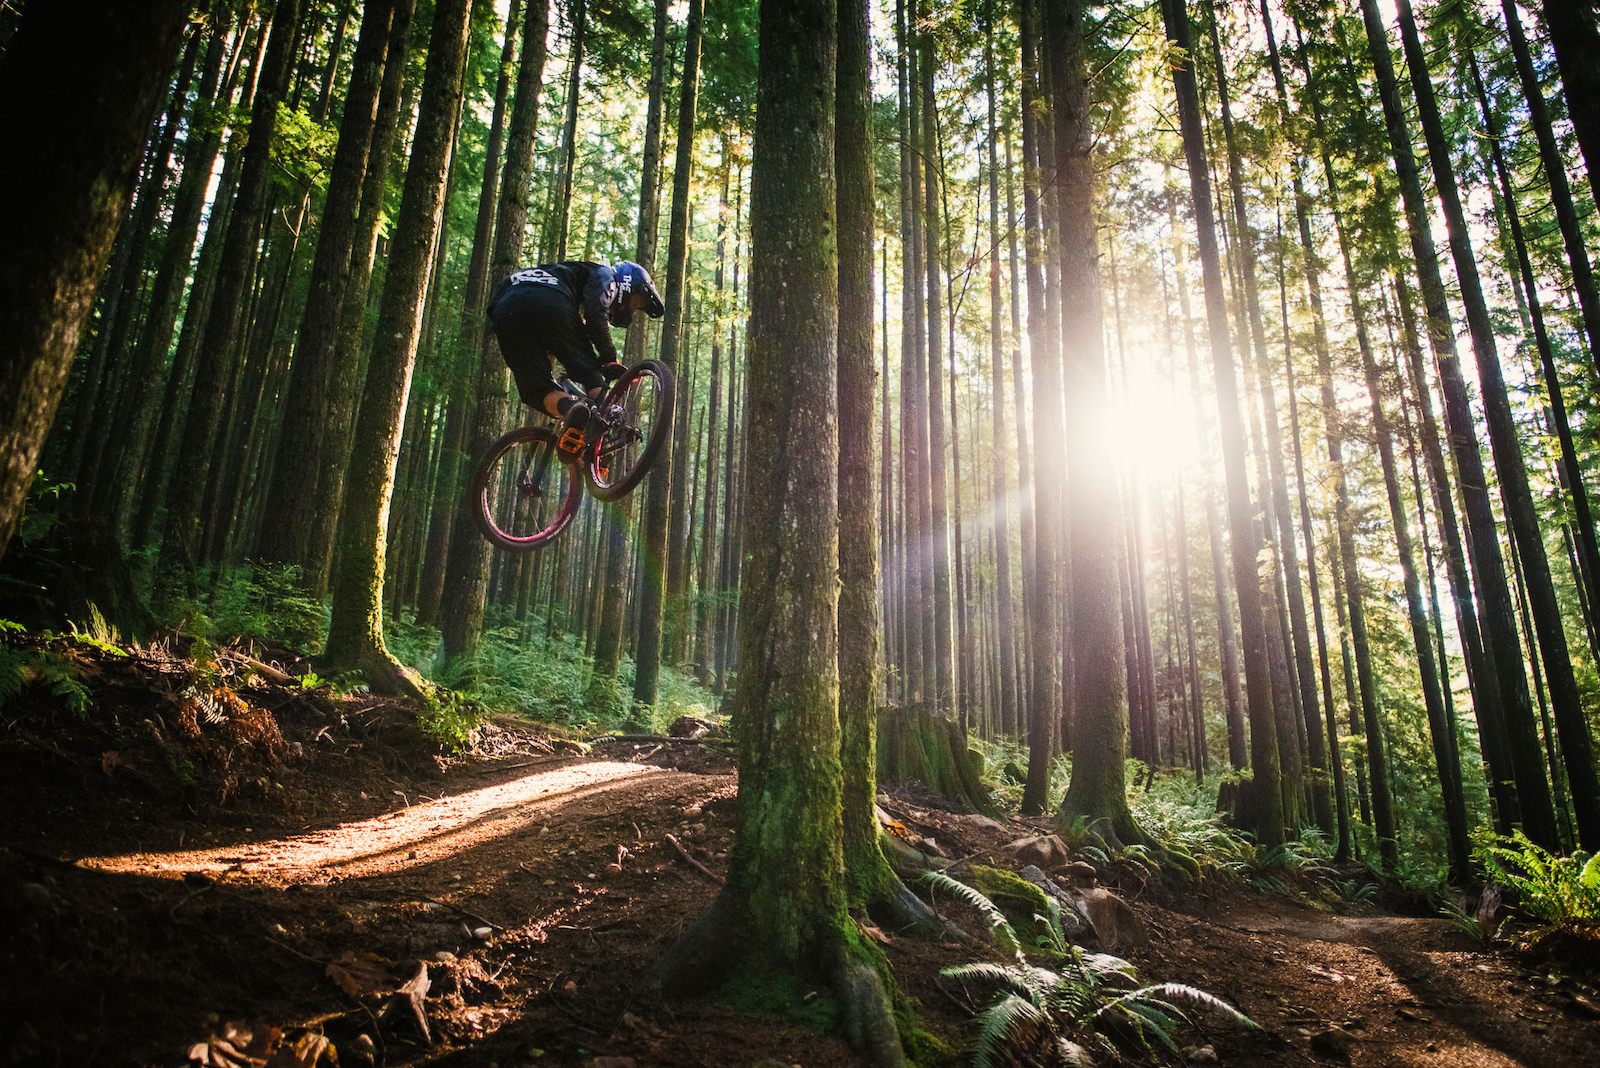 Contest: Who is Chester? - Pinkbike